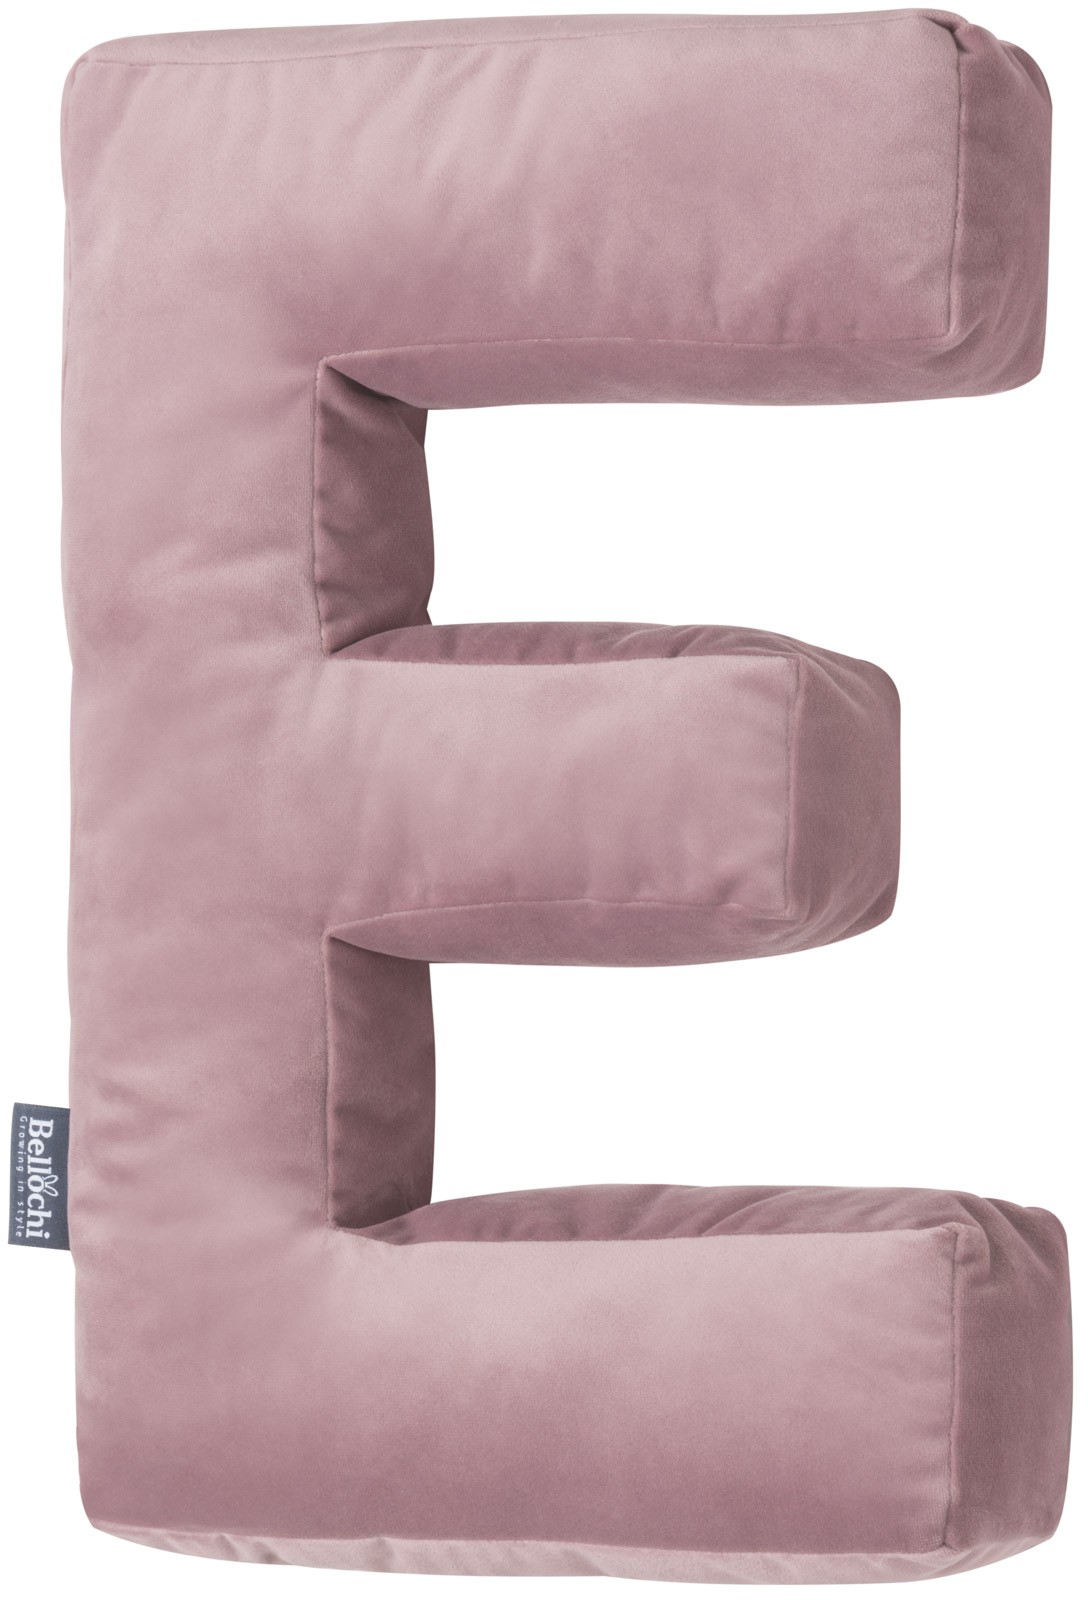 Decorative pillow in the shape of a letter  ‘E’, pink